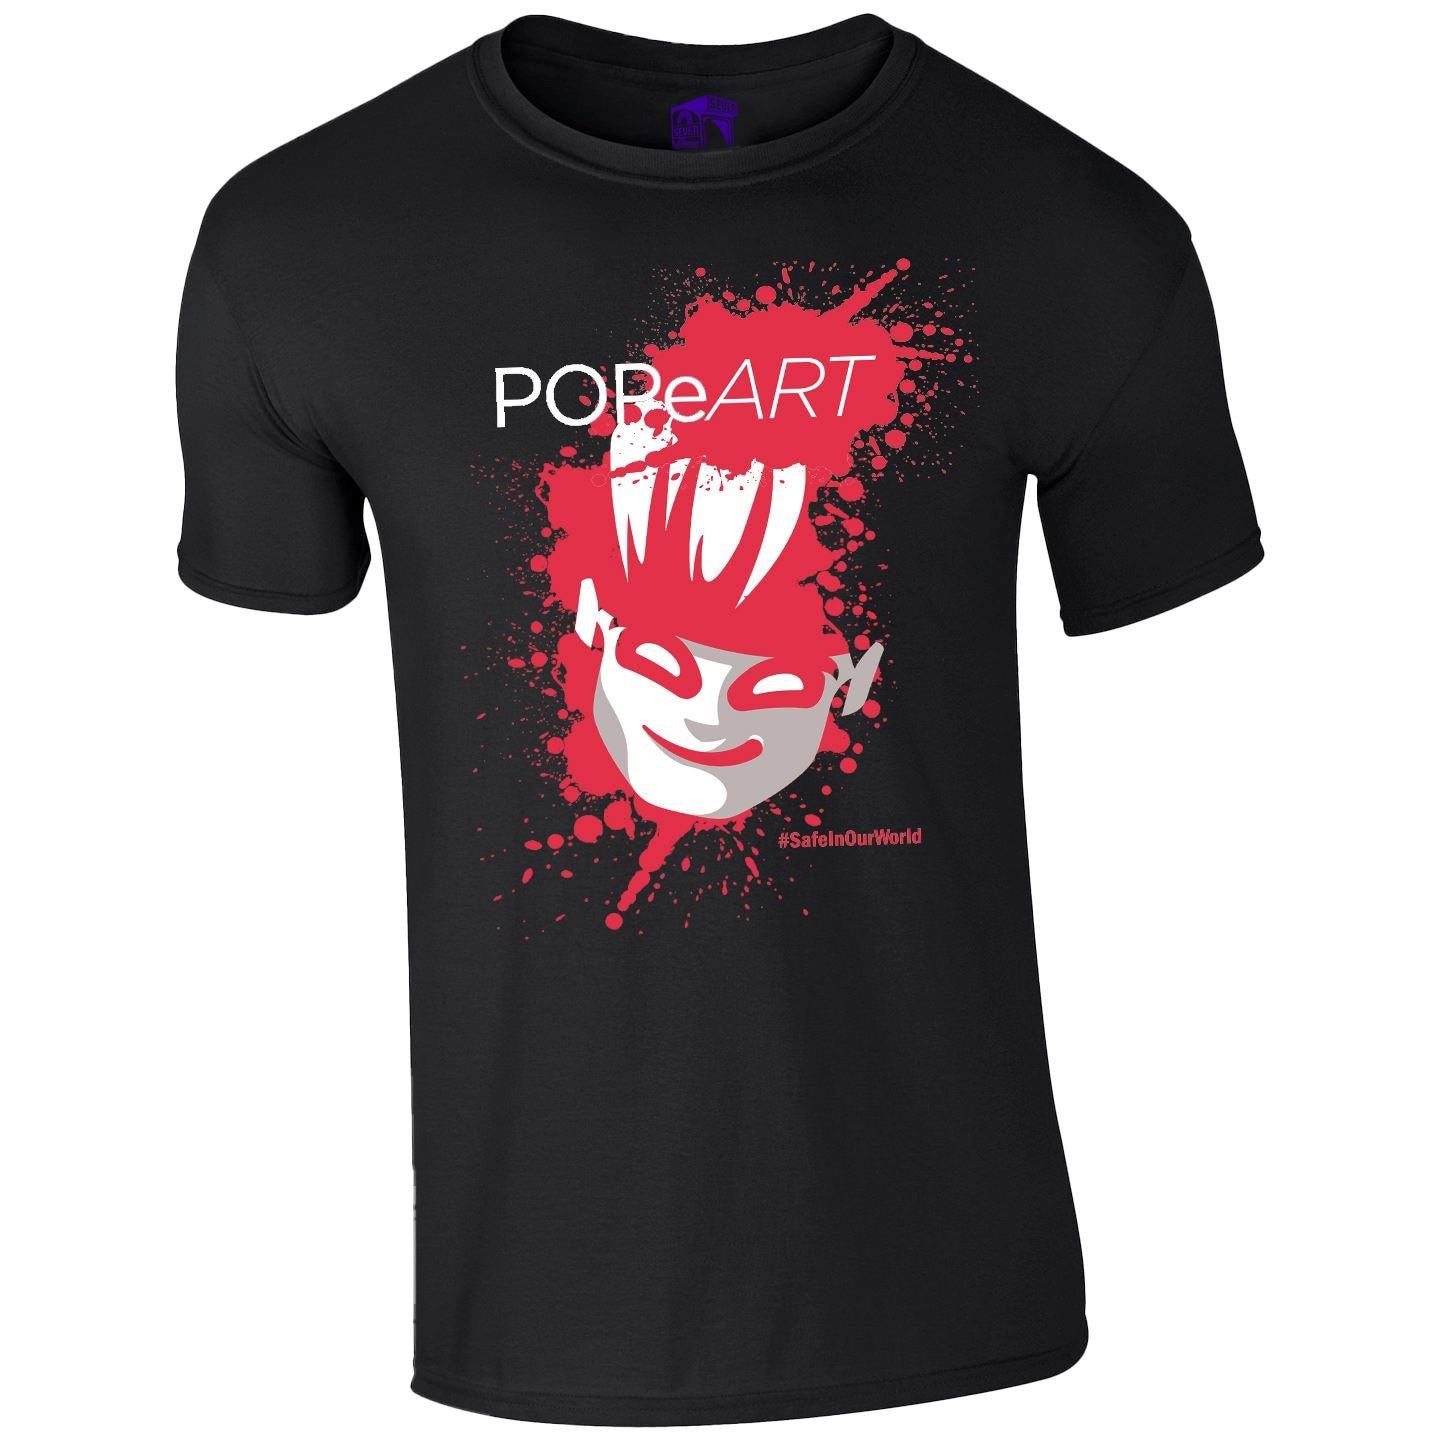 POPeART T-Shirt (SIOW Edition) T-Shirt Seven Squared Small 34-36" Black 